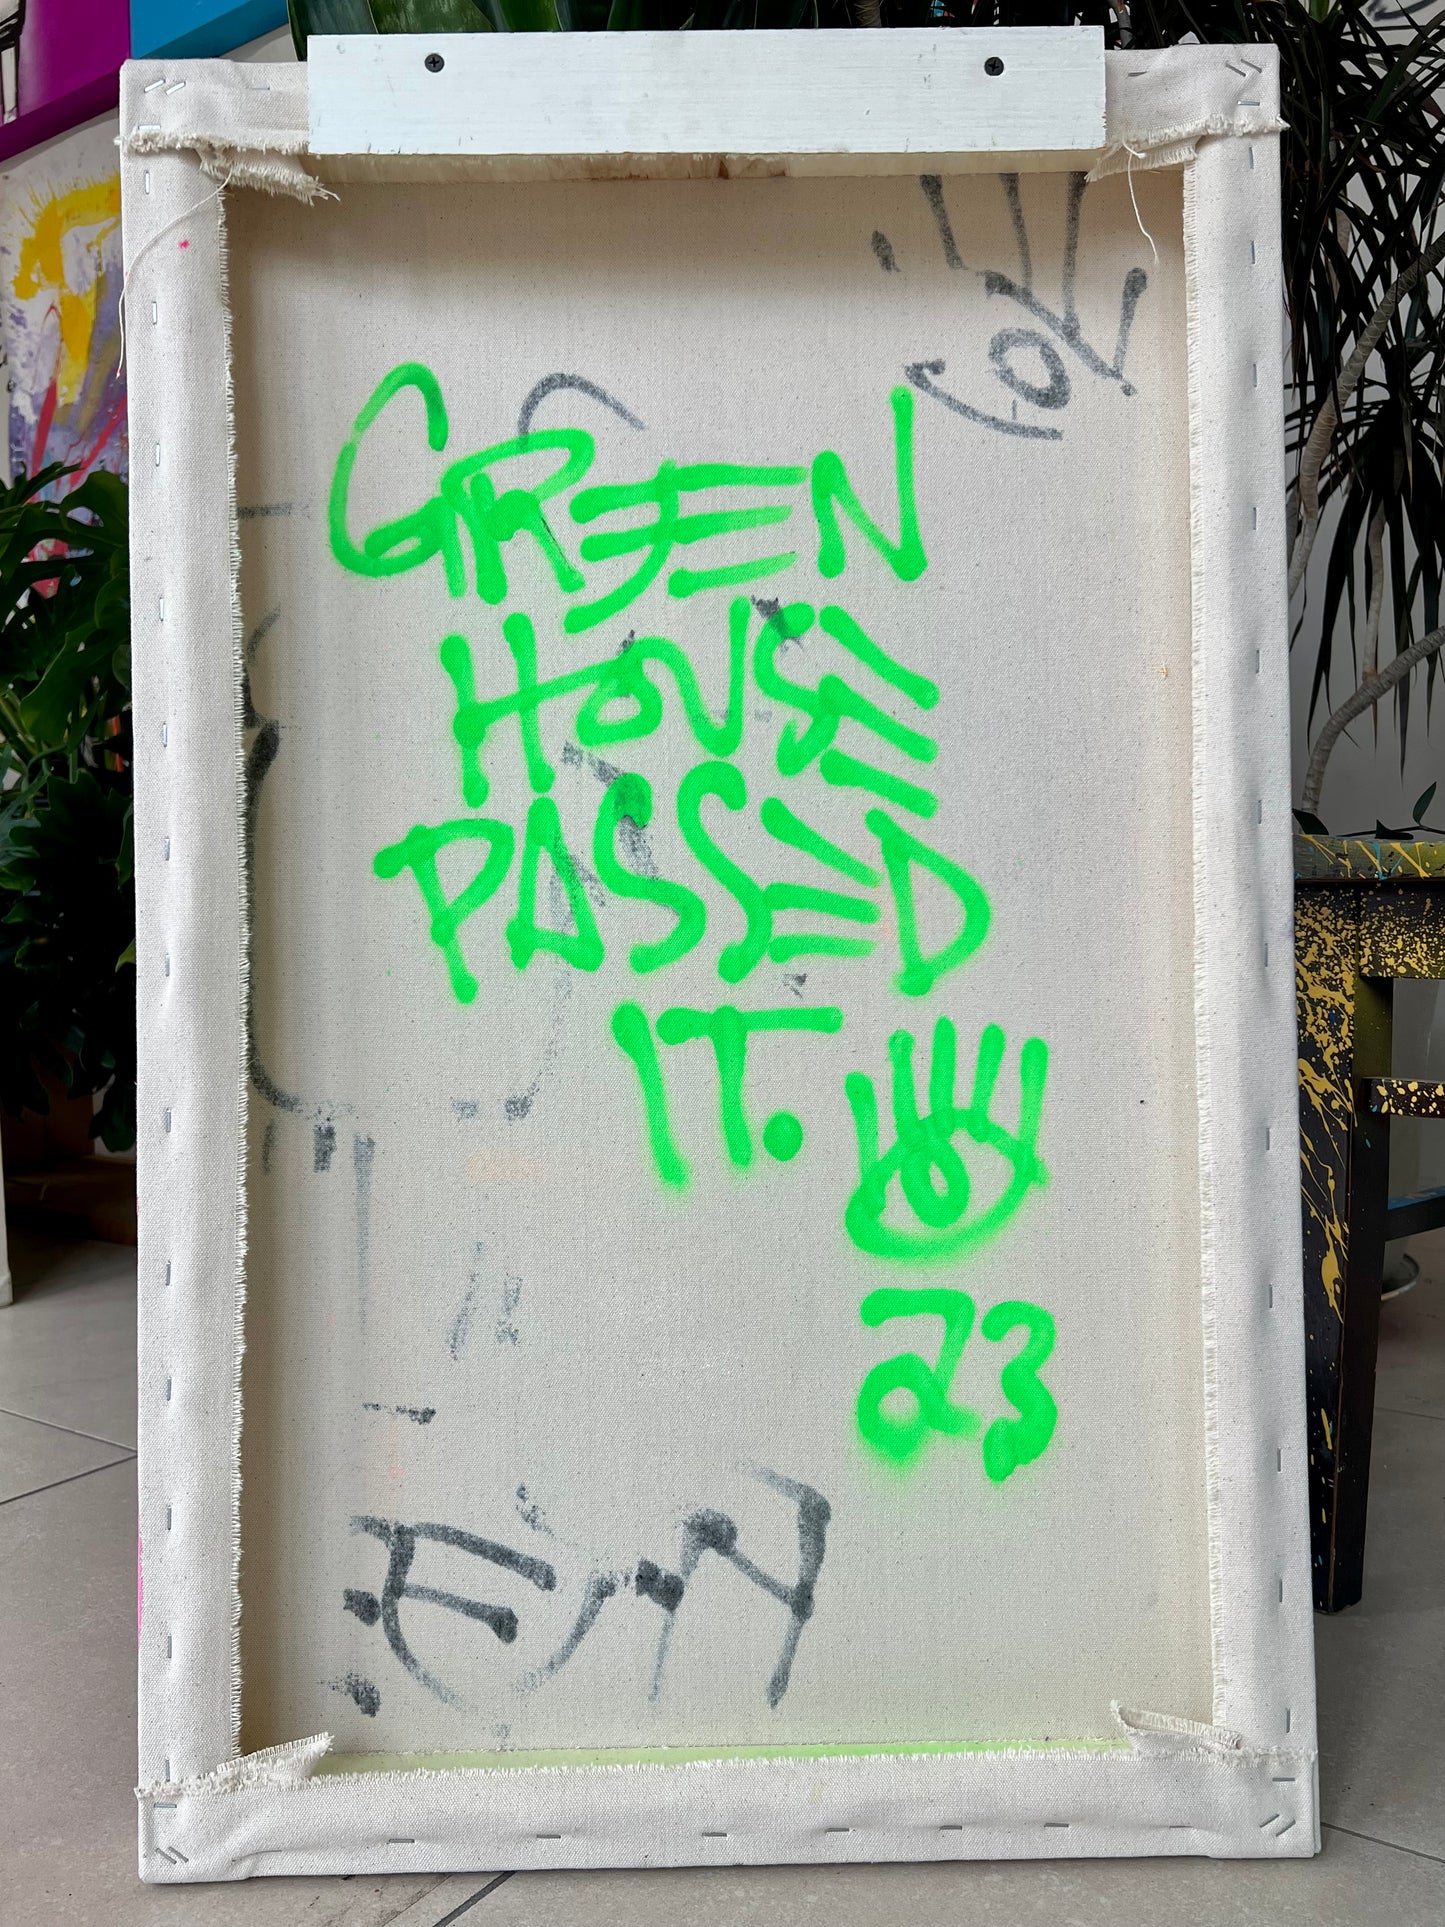 Green house passed it / cave elephant collage / July 2023